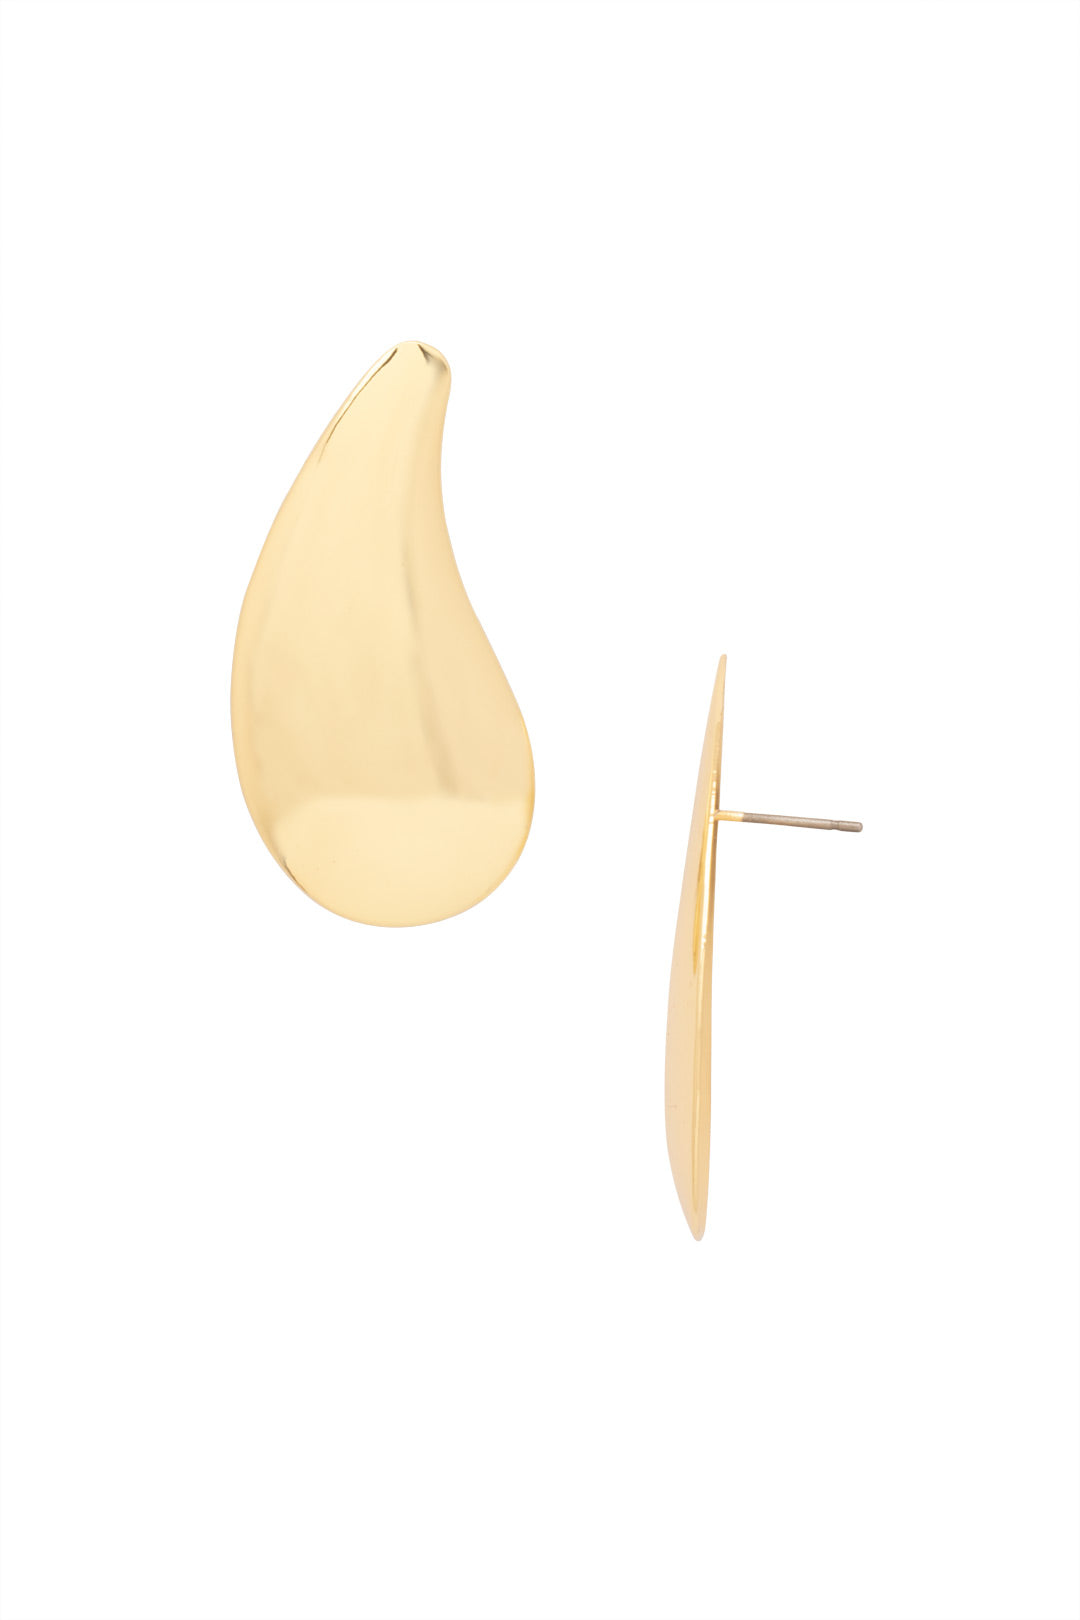 Acadia Statement Earrings - 4EFJ28BGMTL - <p>The Acadia Statement Earrings feature a domed sloped metal teardrop on a post. From Sorrelli's Bare Metallic collection in our Bright Gold-tone finish.</p>